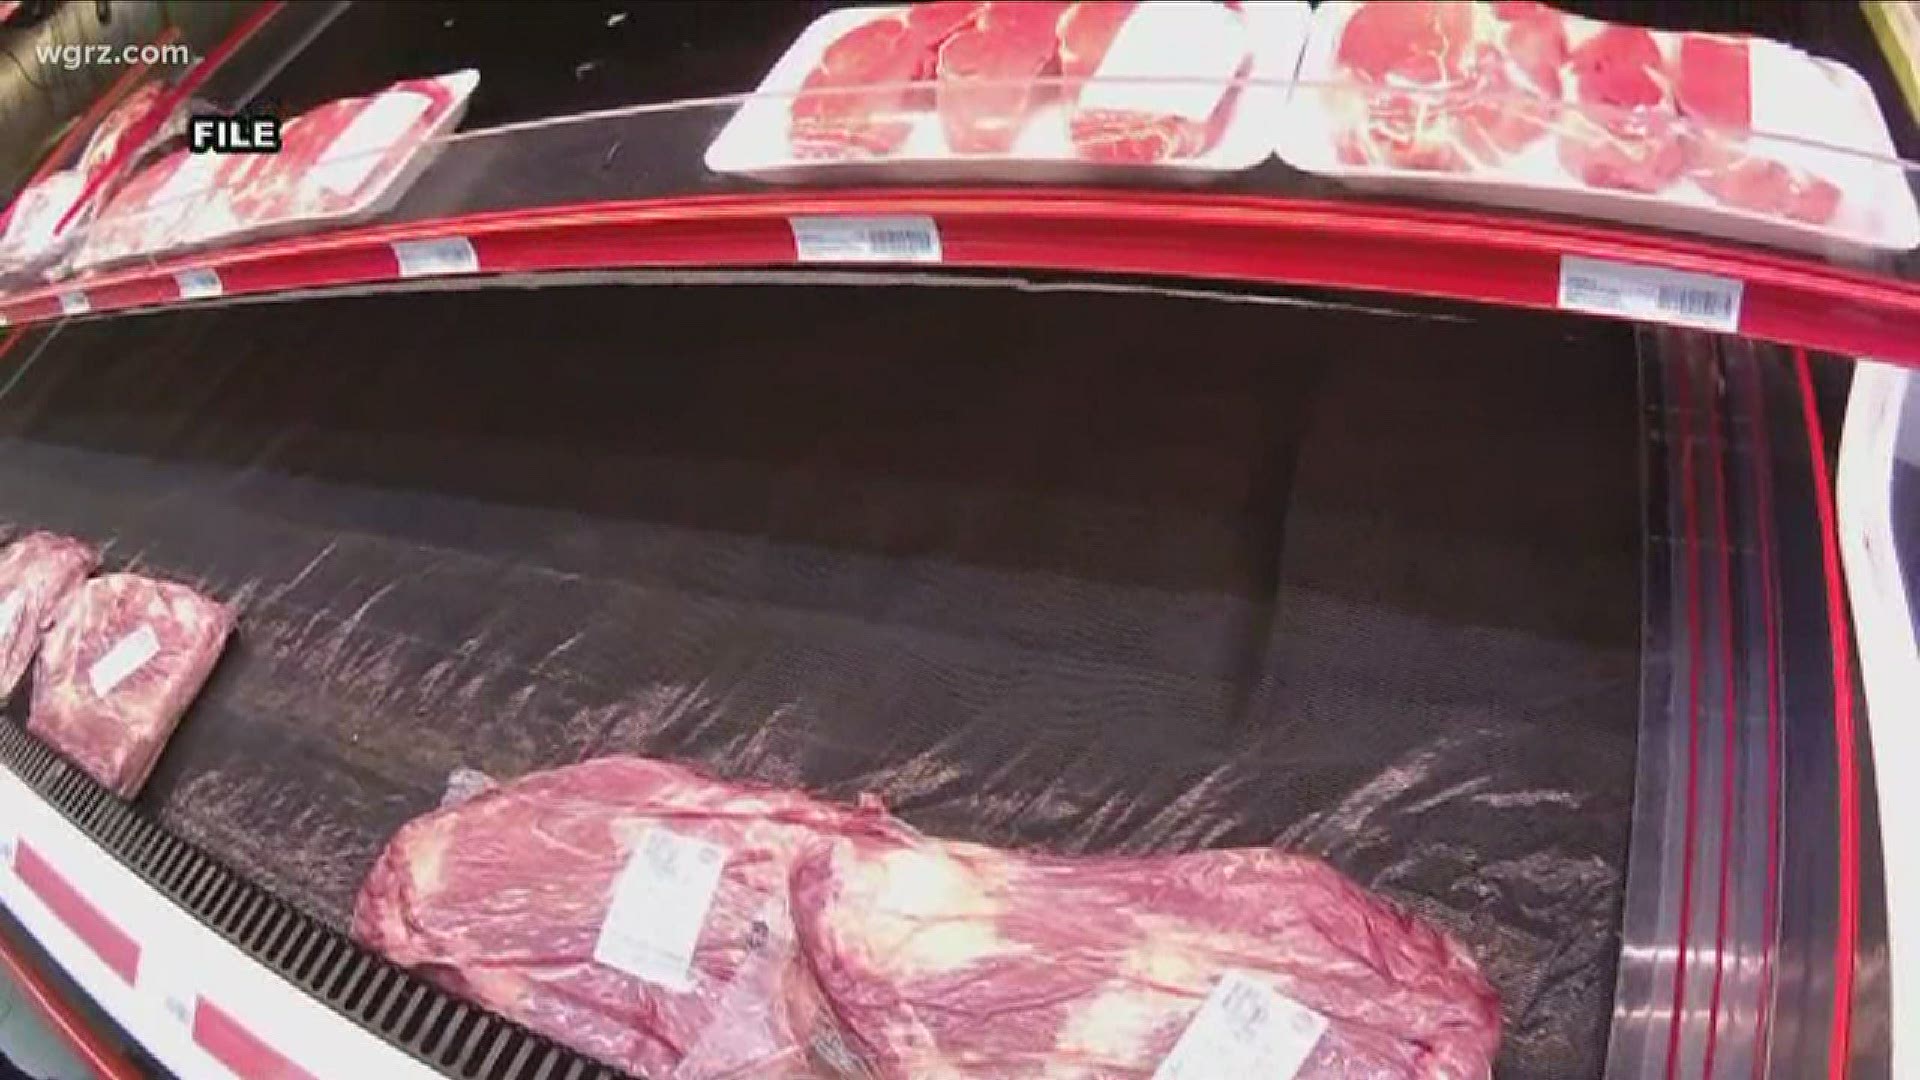 Stores Limiting The Amount Of Meat Shoppers Can Buy